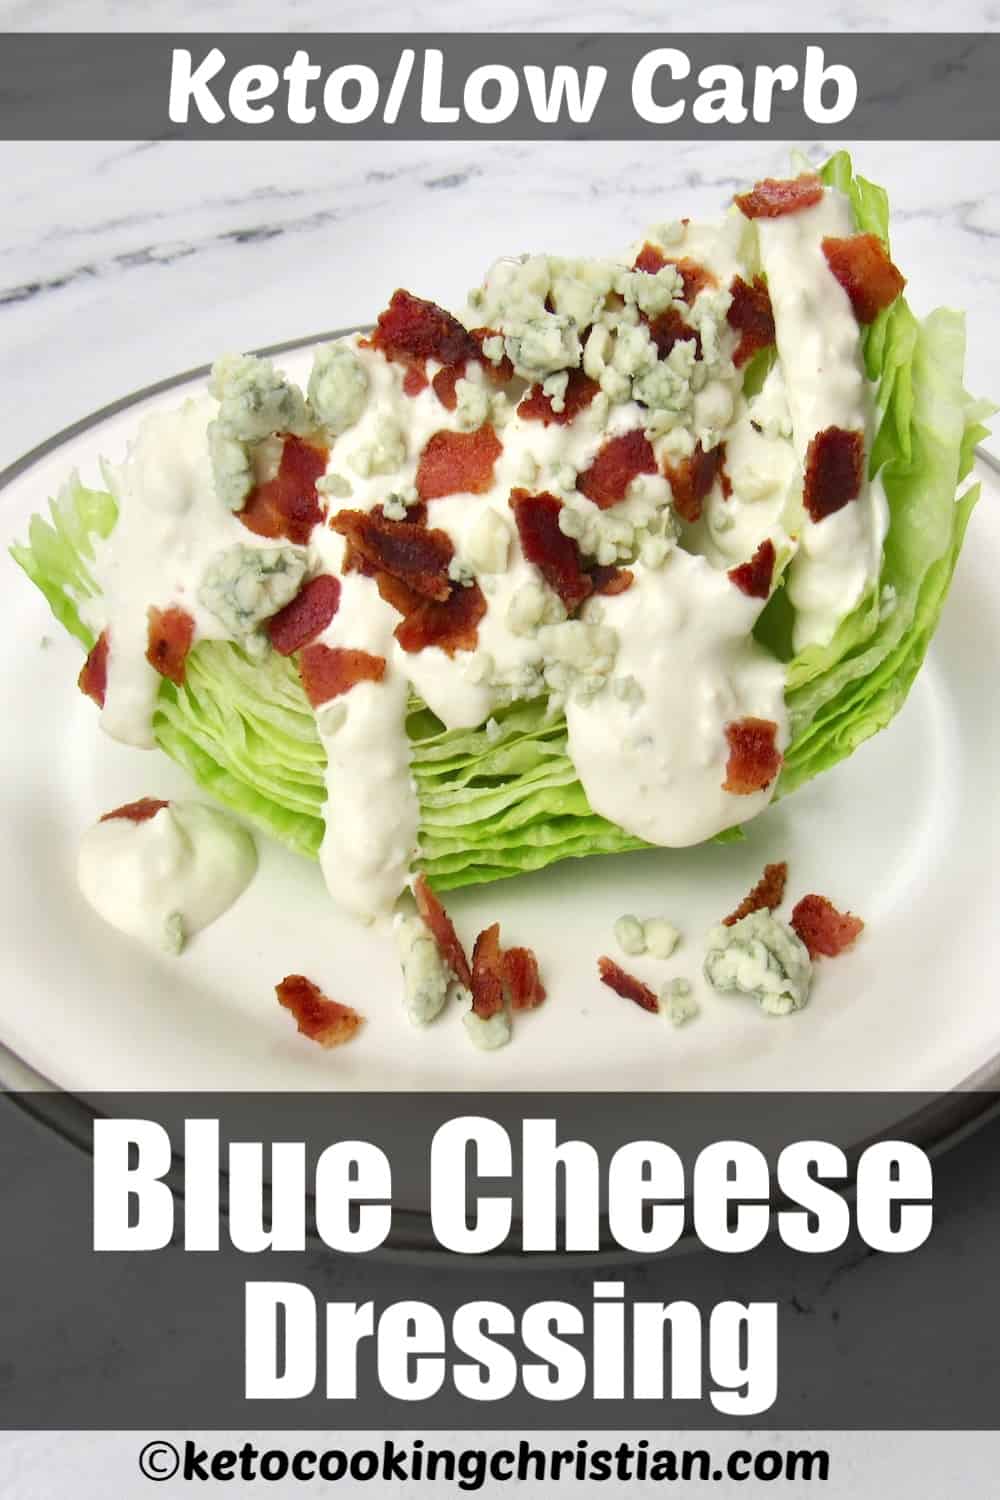 wedge of iceberg lettuce topped with blue cheese dressing, crumbles and bacon on white plate